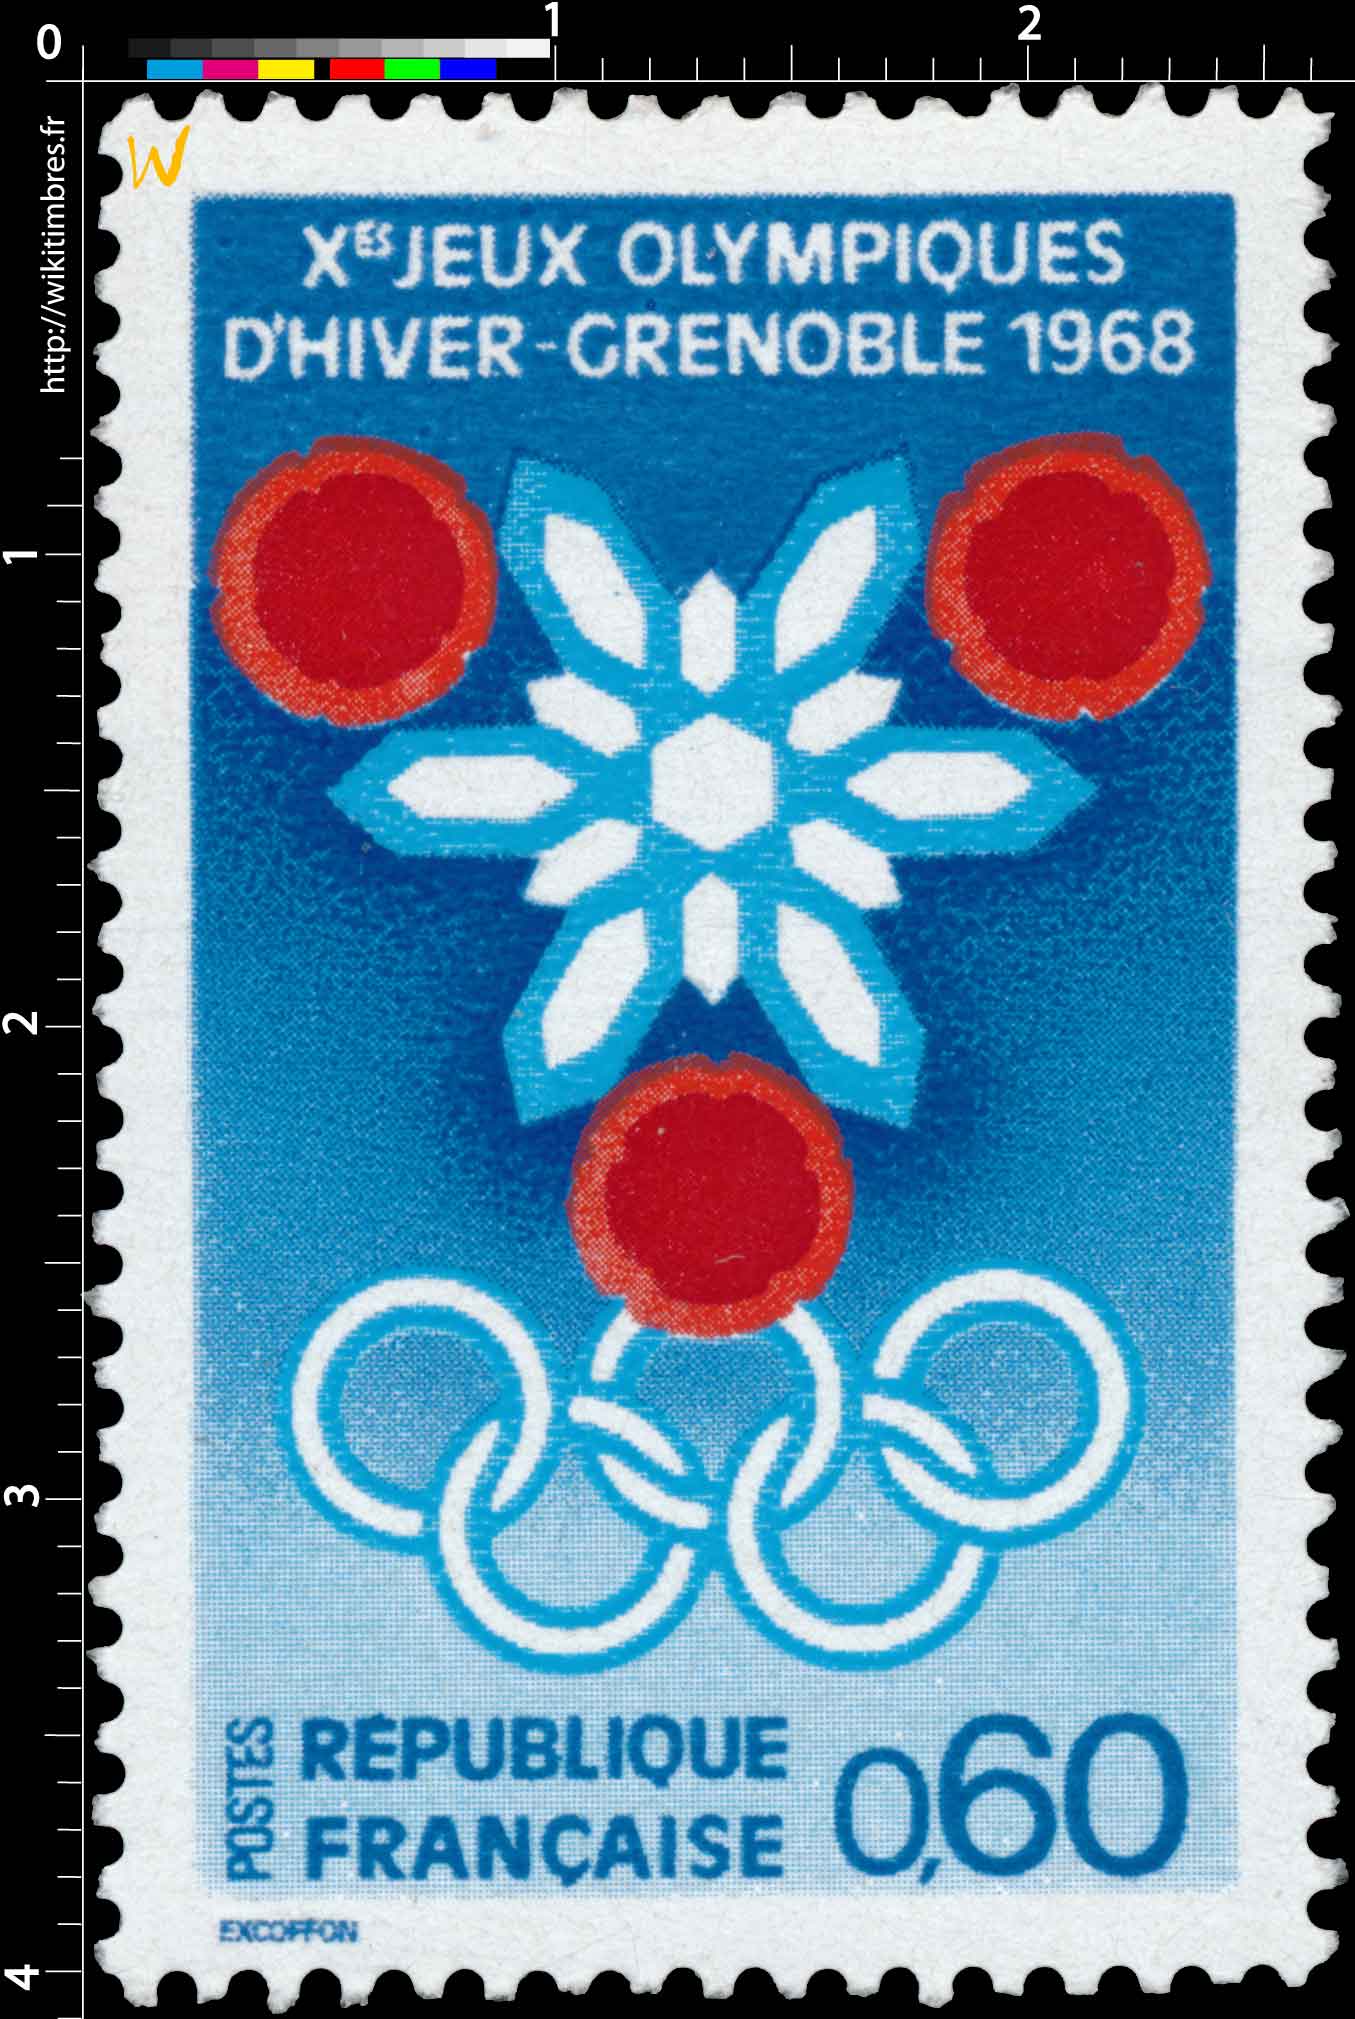 XES JEUX OLYMPIQUES D'HIVER - GRENOBLE 1968